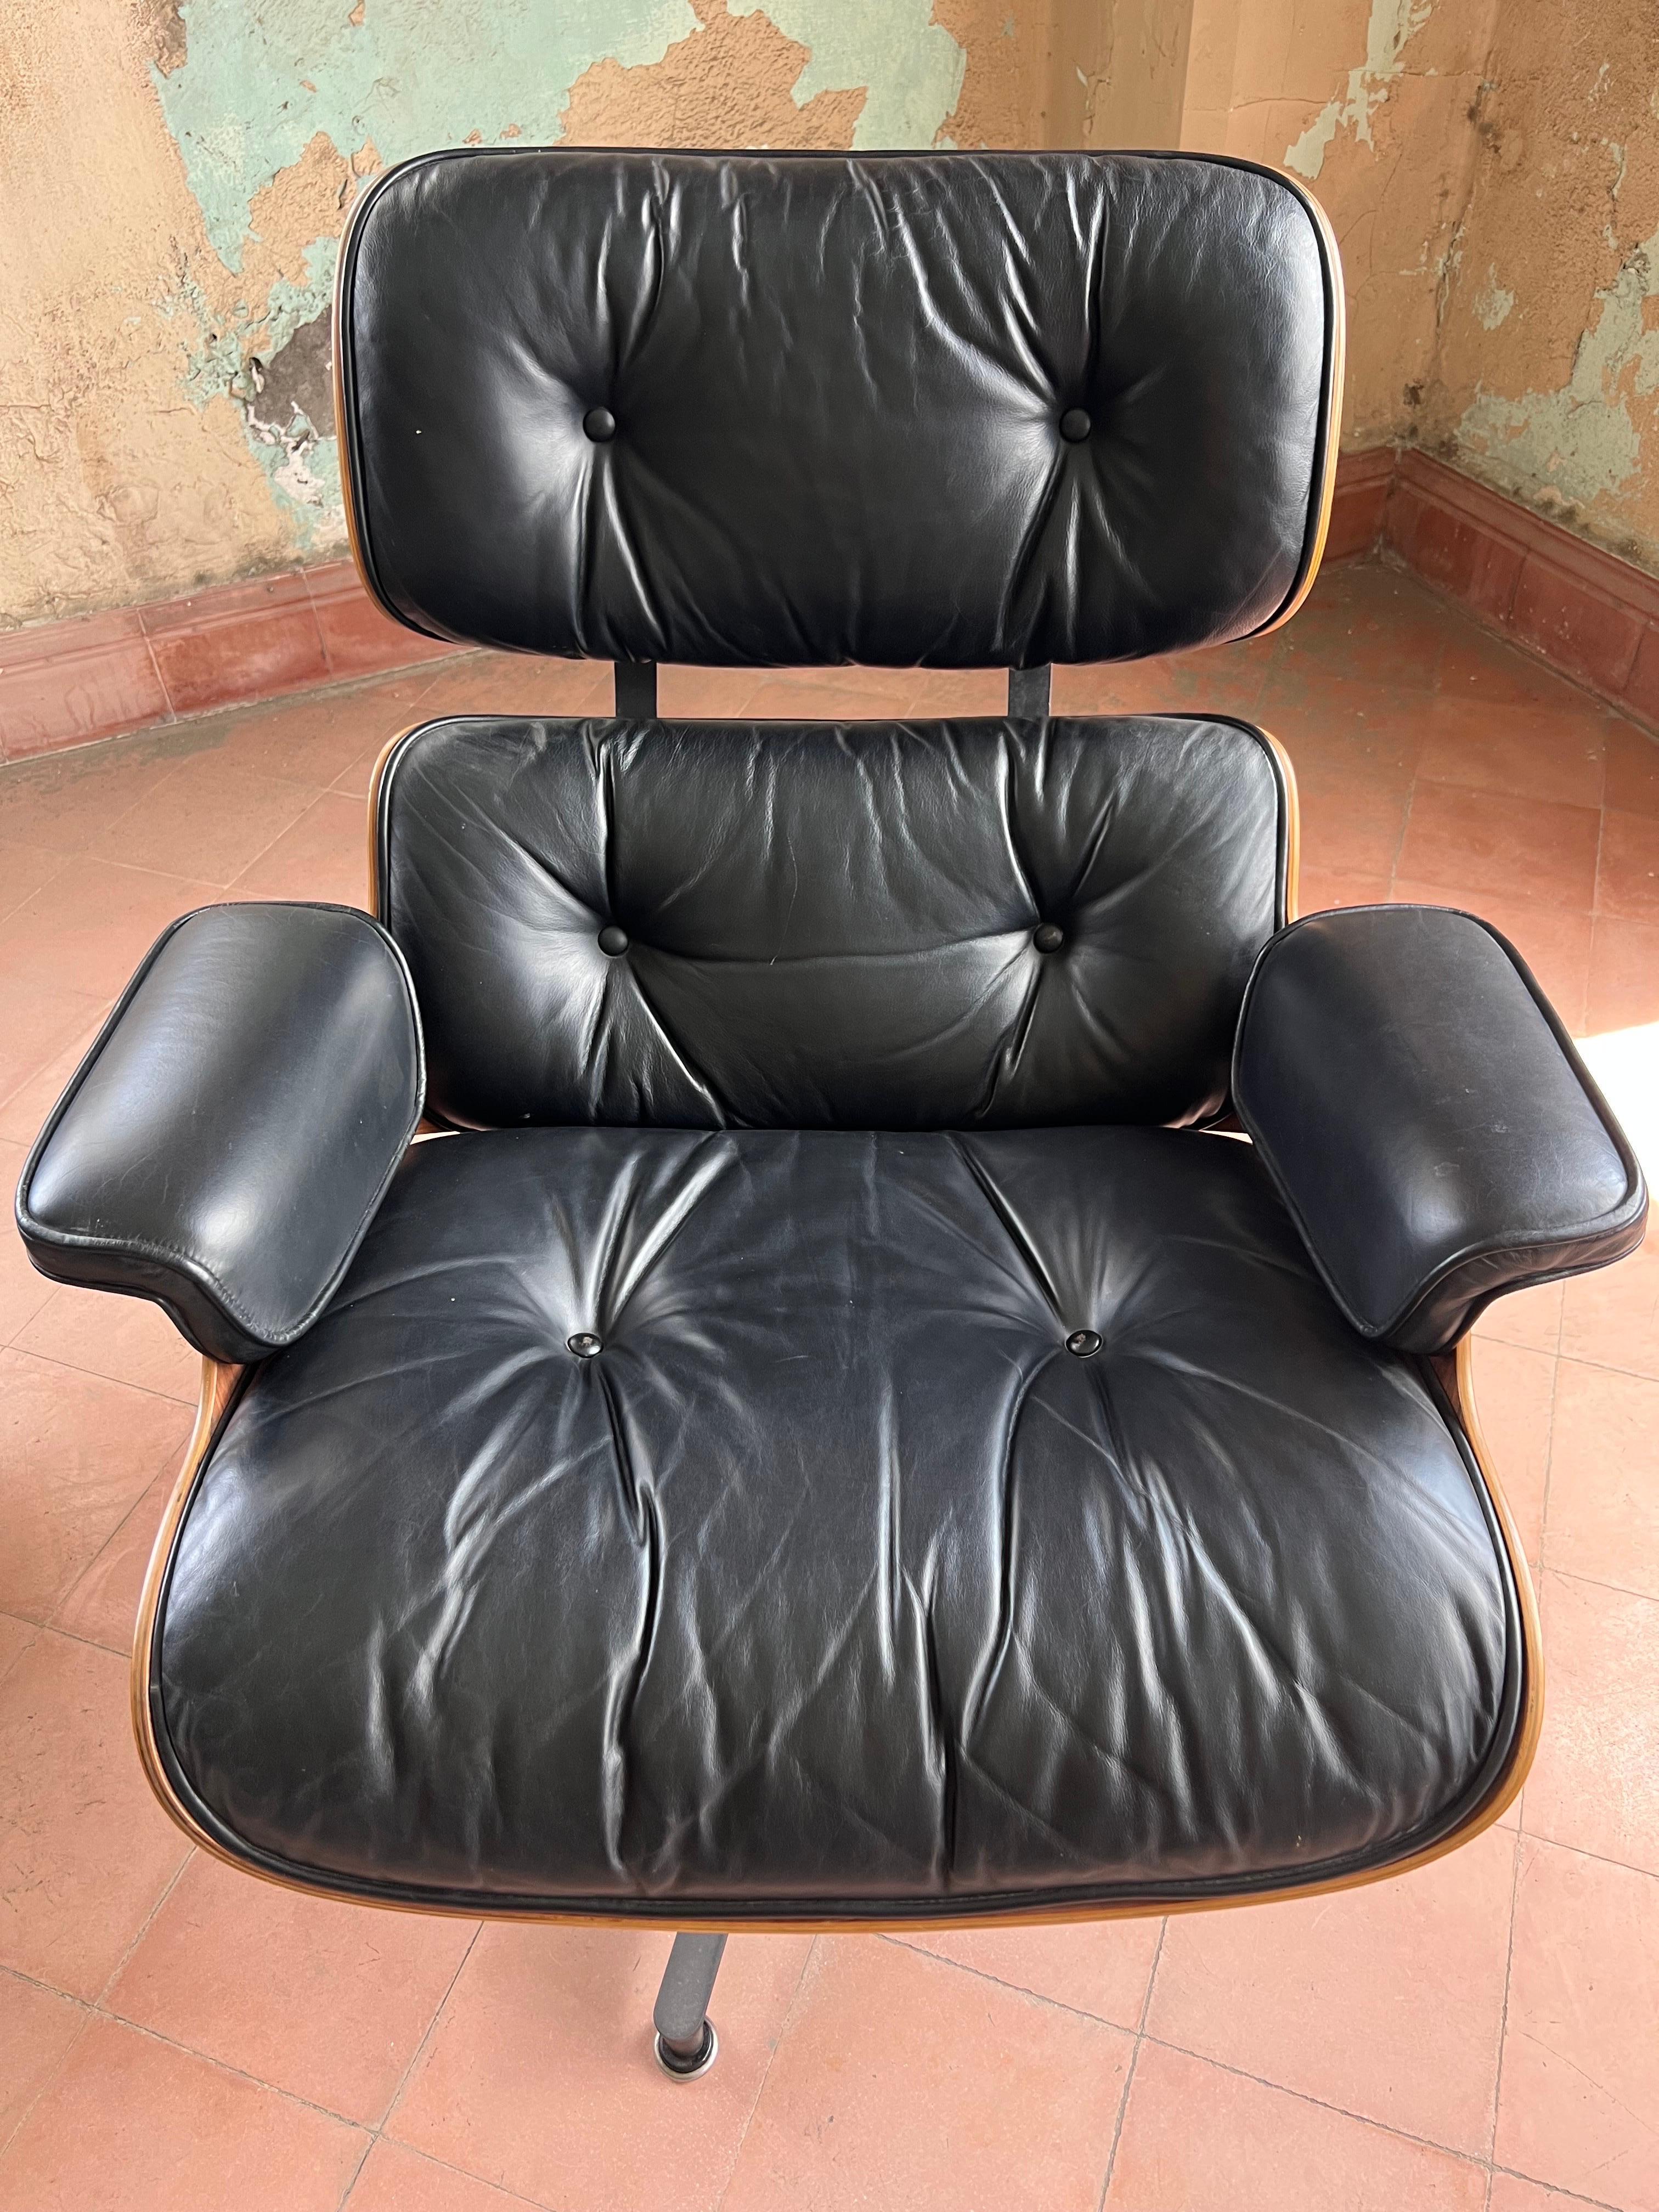 Vintage Herman Miller Eames Lounge Chair and Ottoman In Good Condition For Sale In San Pedro Garza Garcia, Nuevo Leon